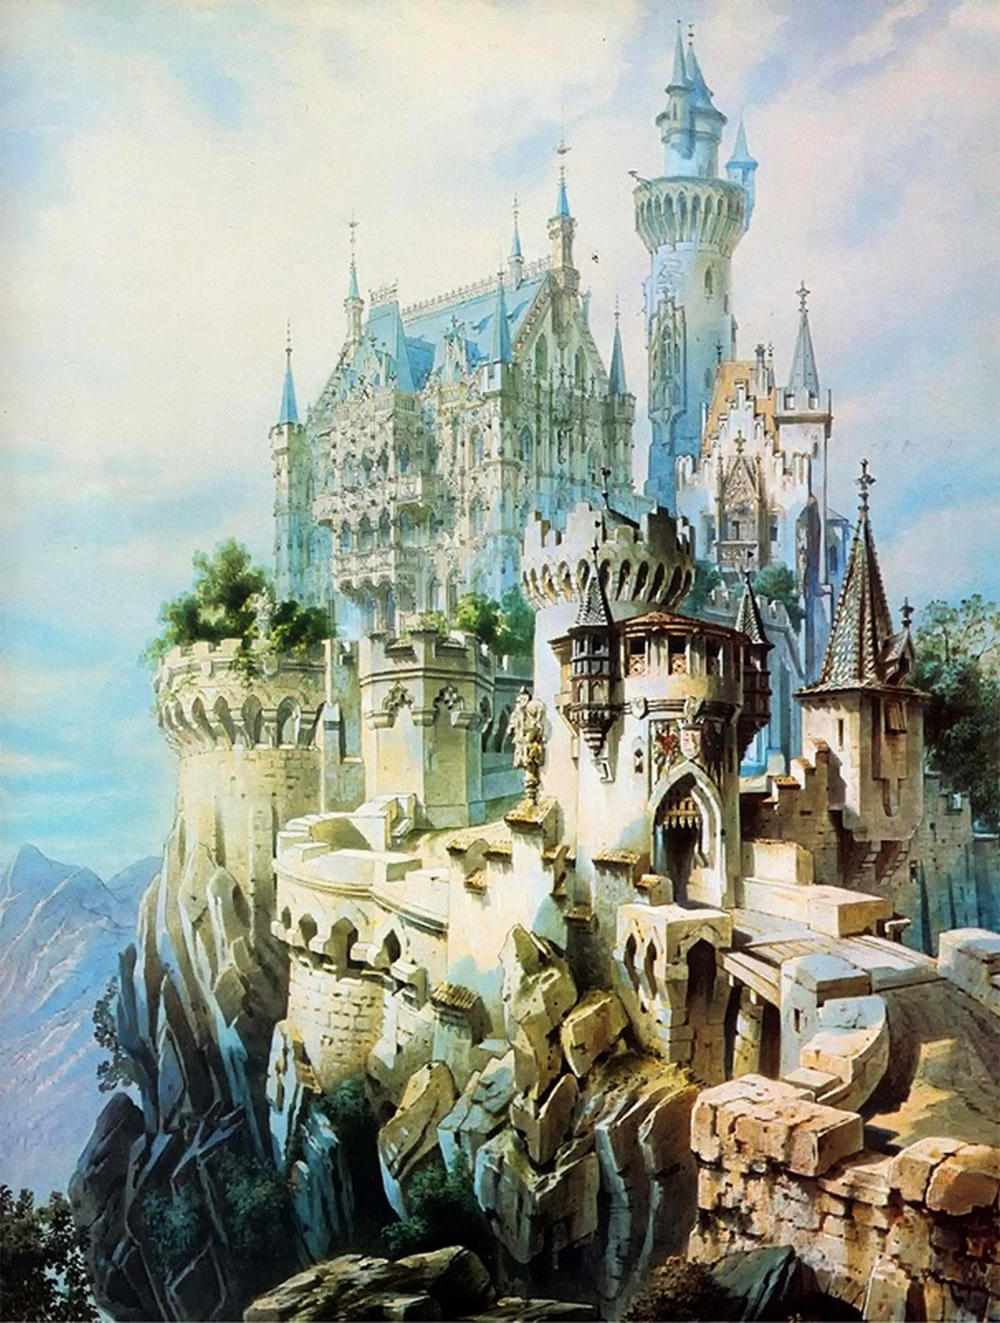 The fairytale dream concept for Falkenstein Castle of Ludwig II and Christian Jank, 1883